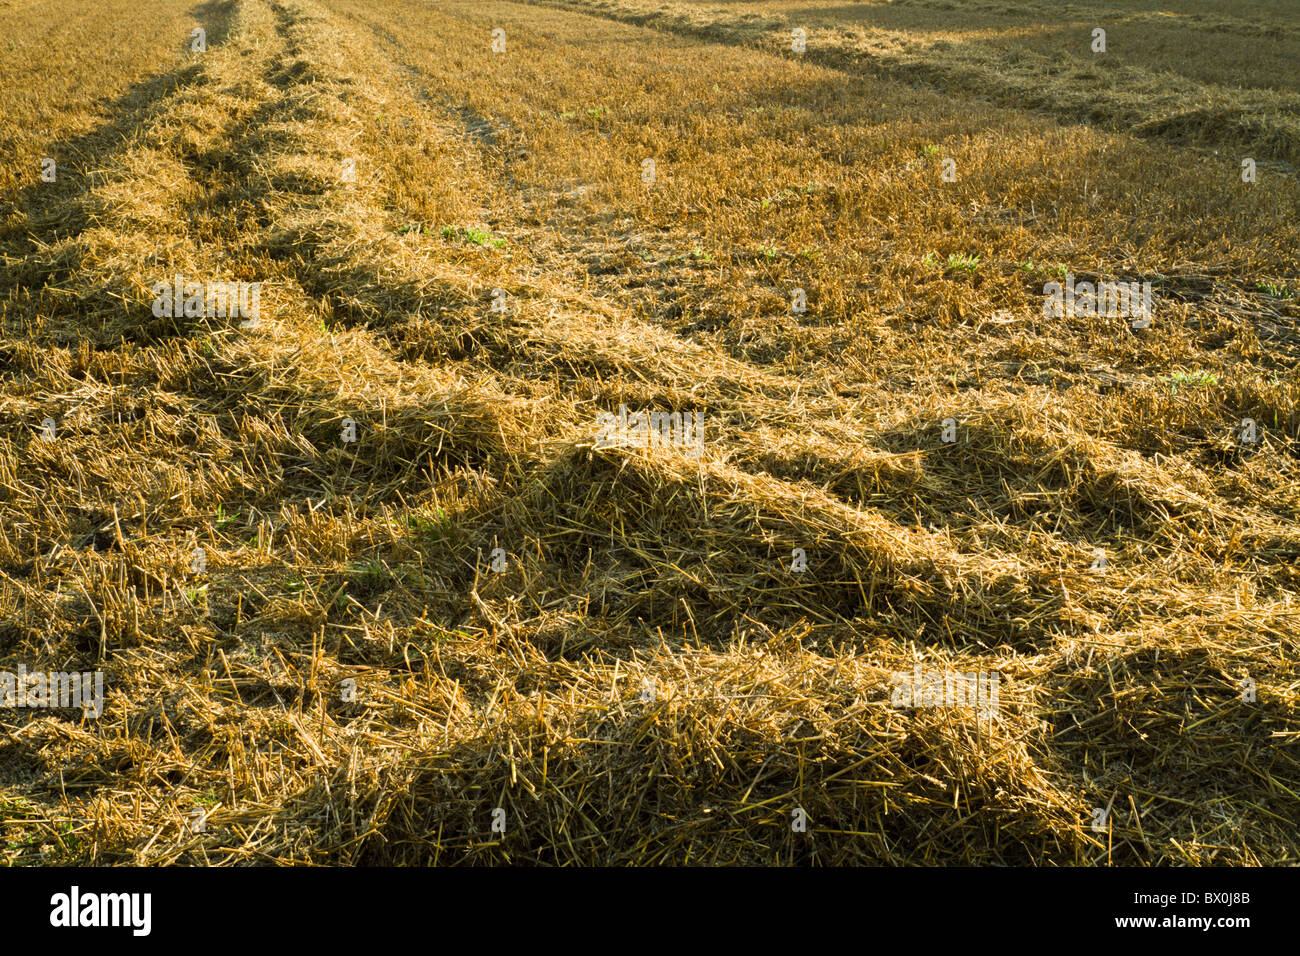 Straw and stubble in a field, England, UK Stock Photo